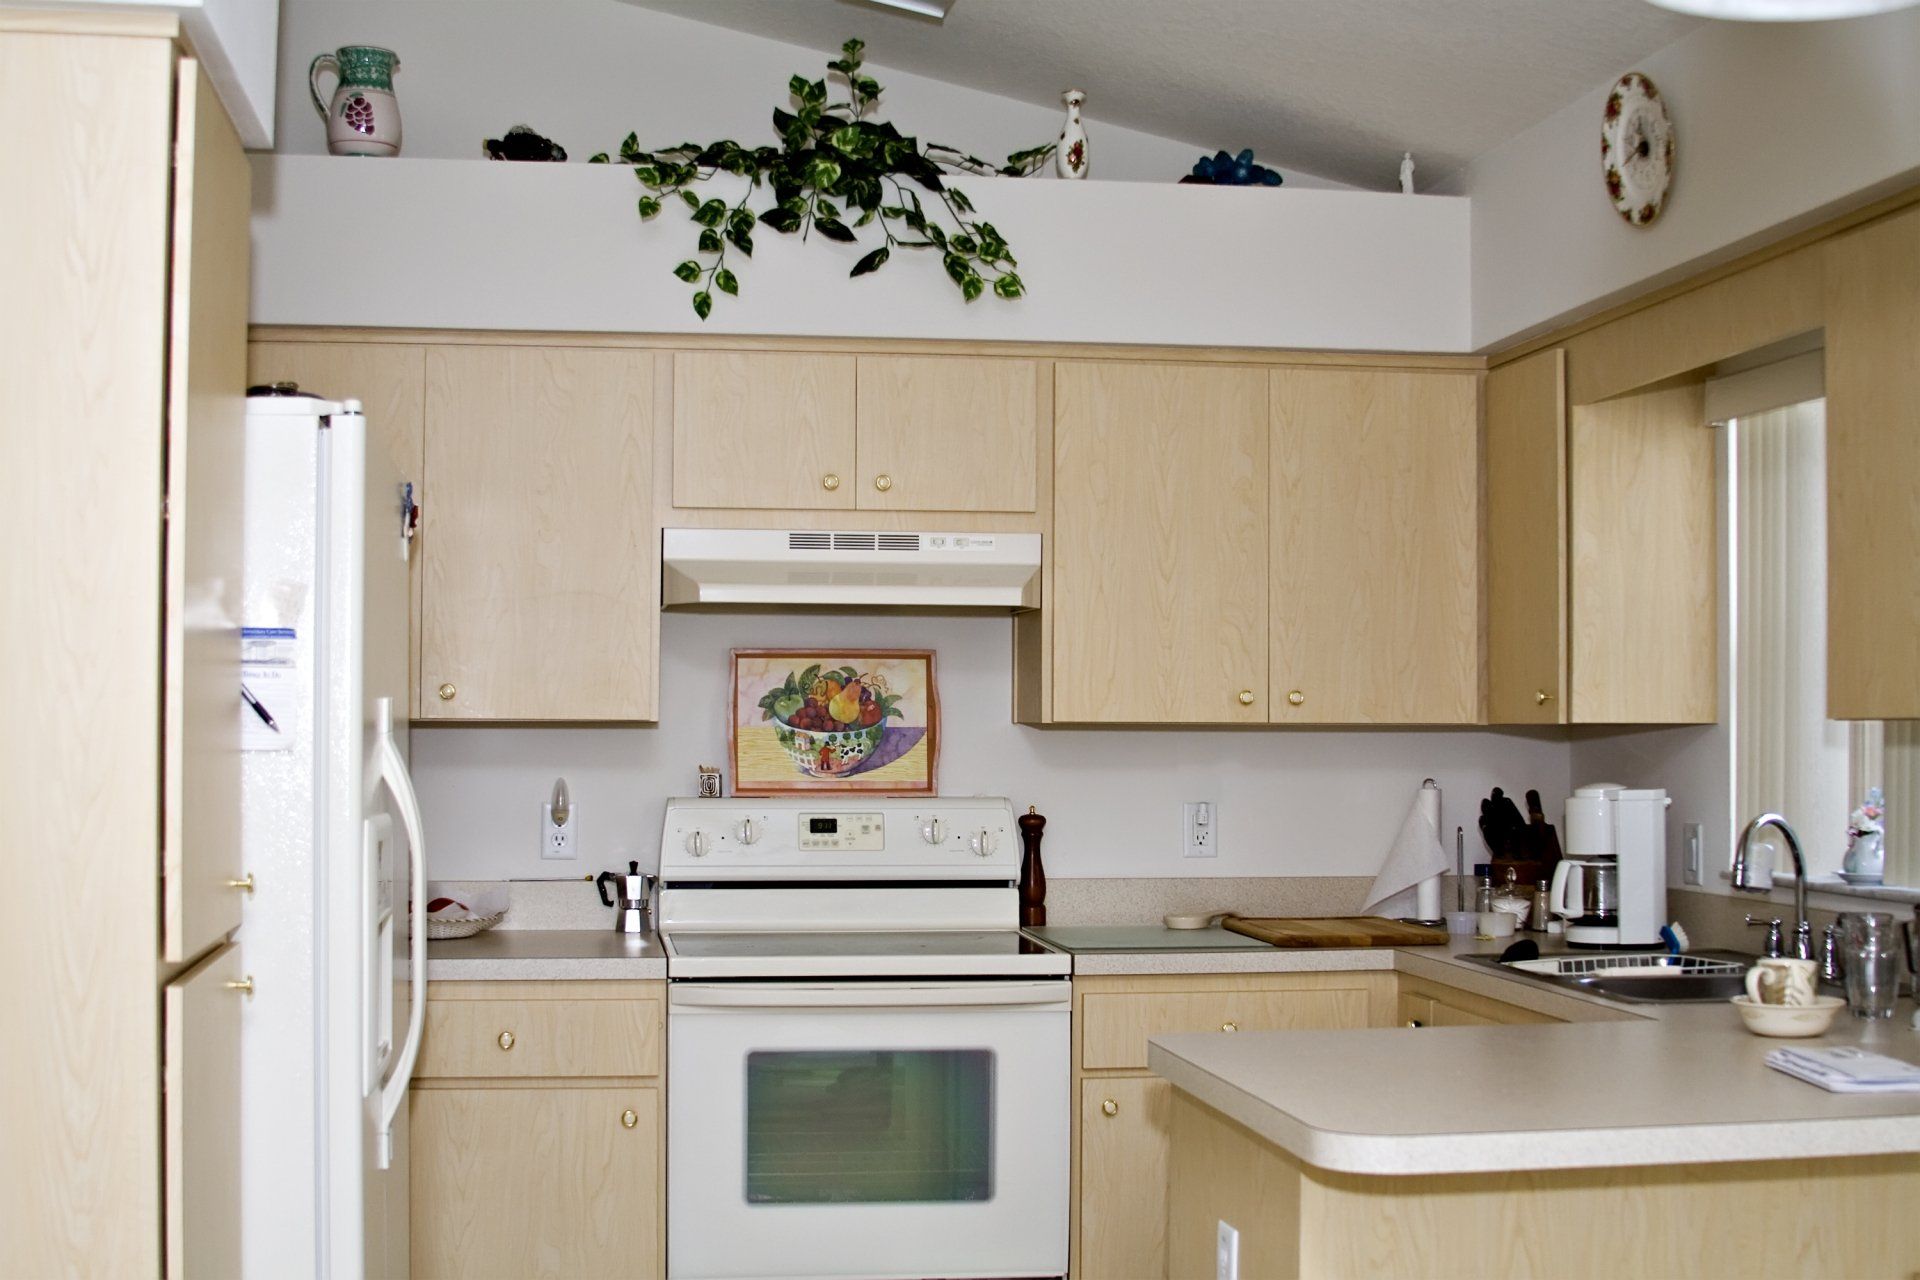 cramped kitchen space before remodeling by Top Gunn Kitchen Design